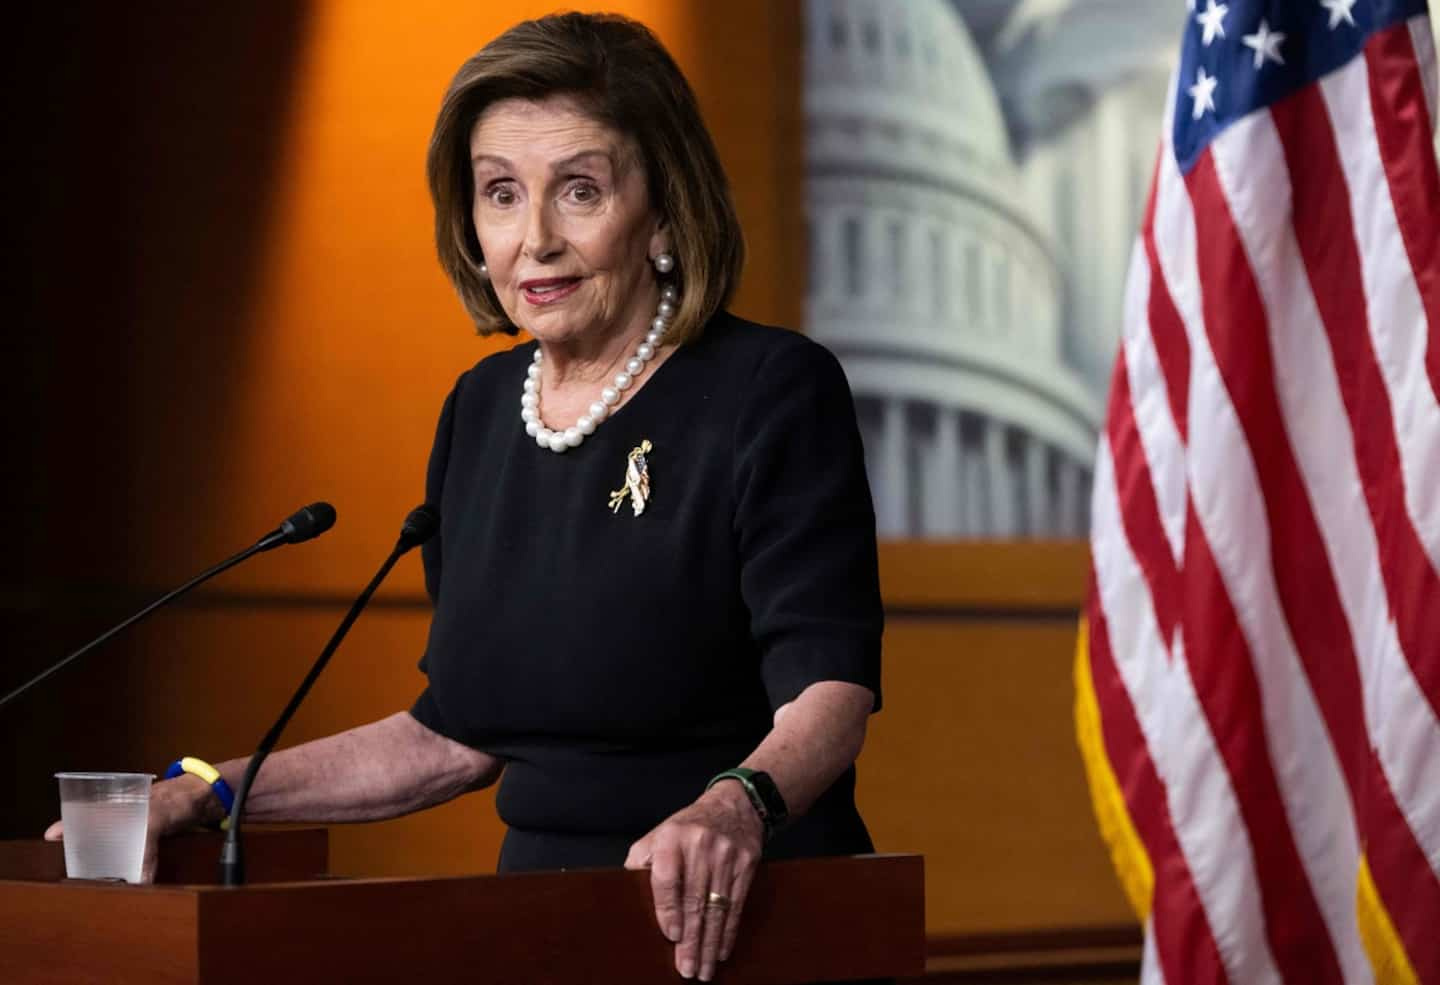 Washington is trying to demine a possible trip by Pelosi to Taiwan